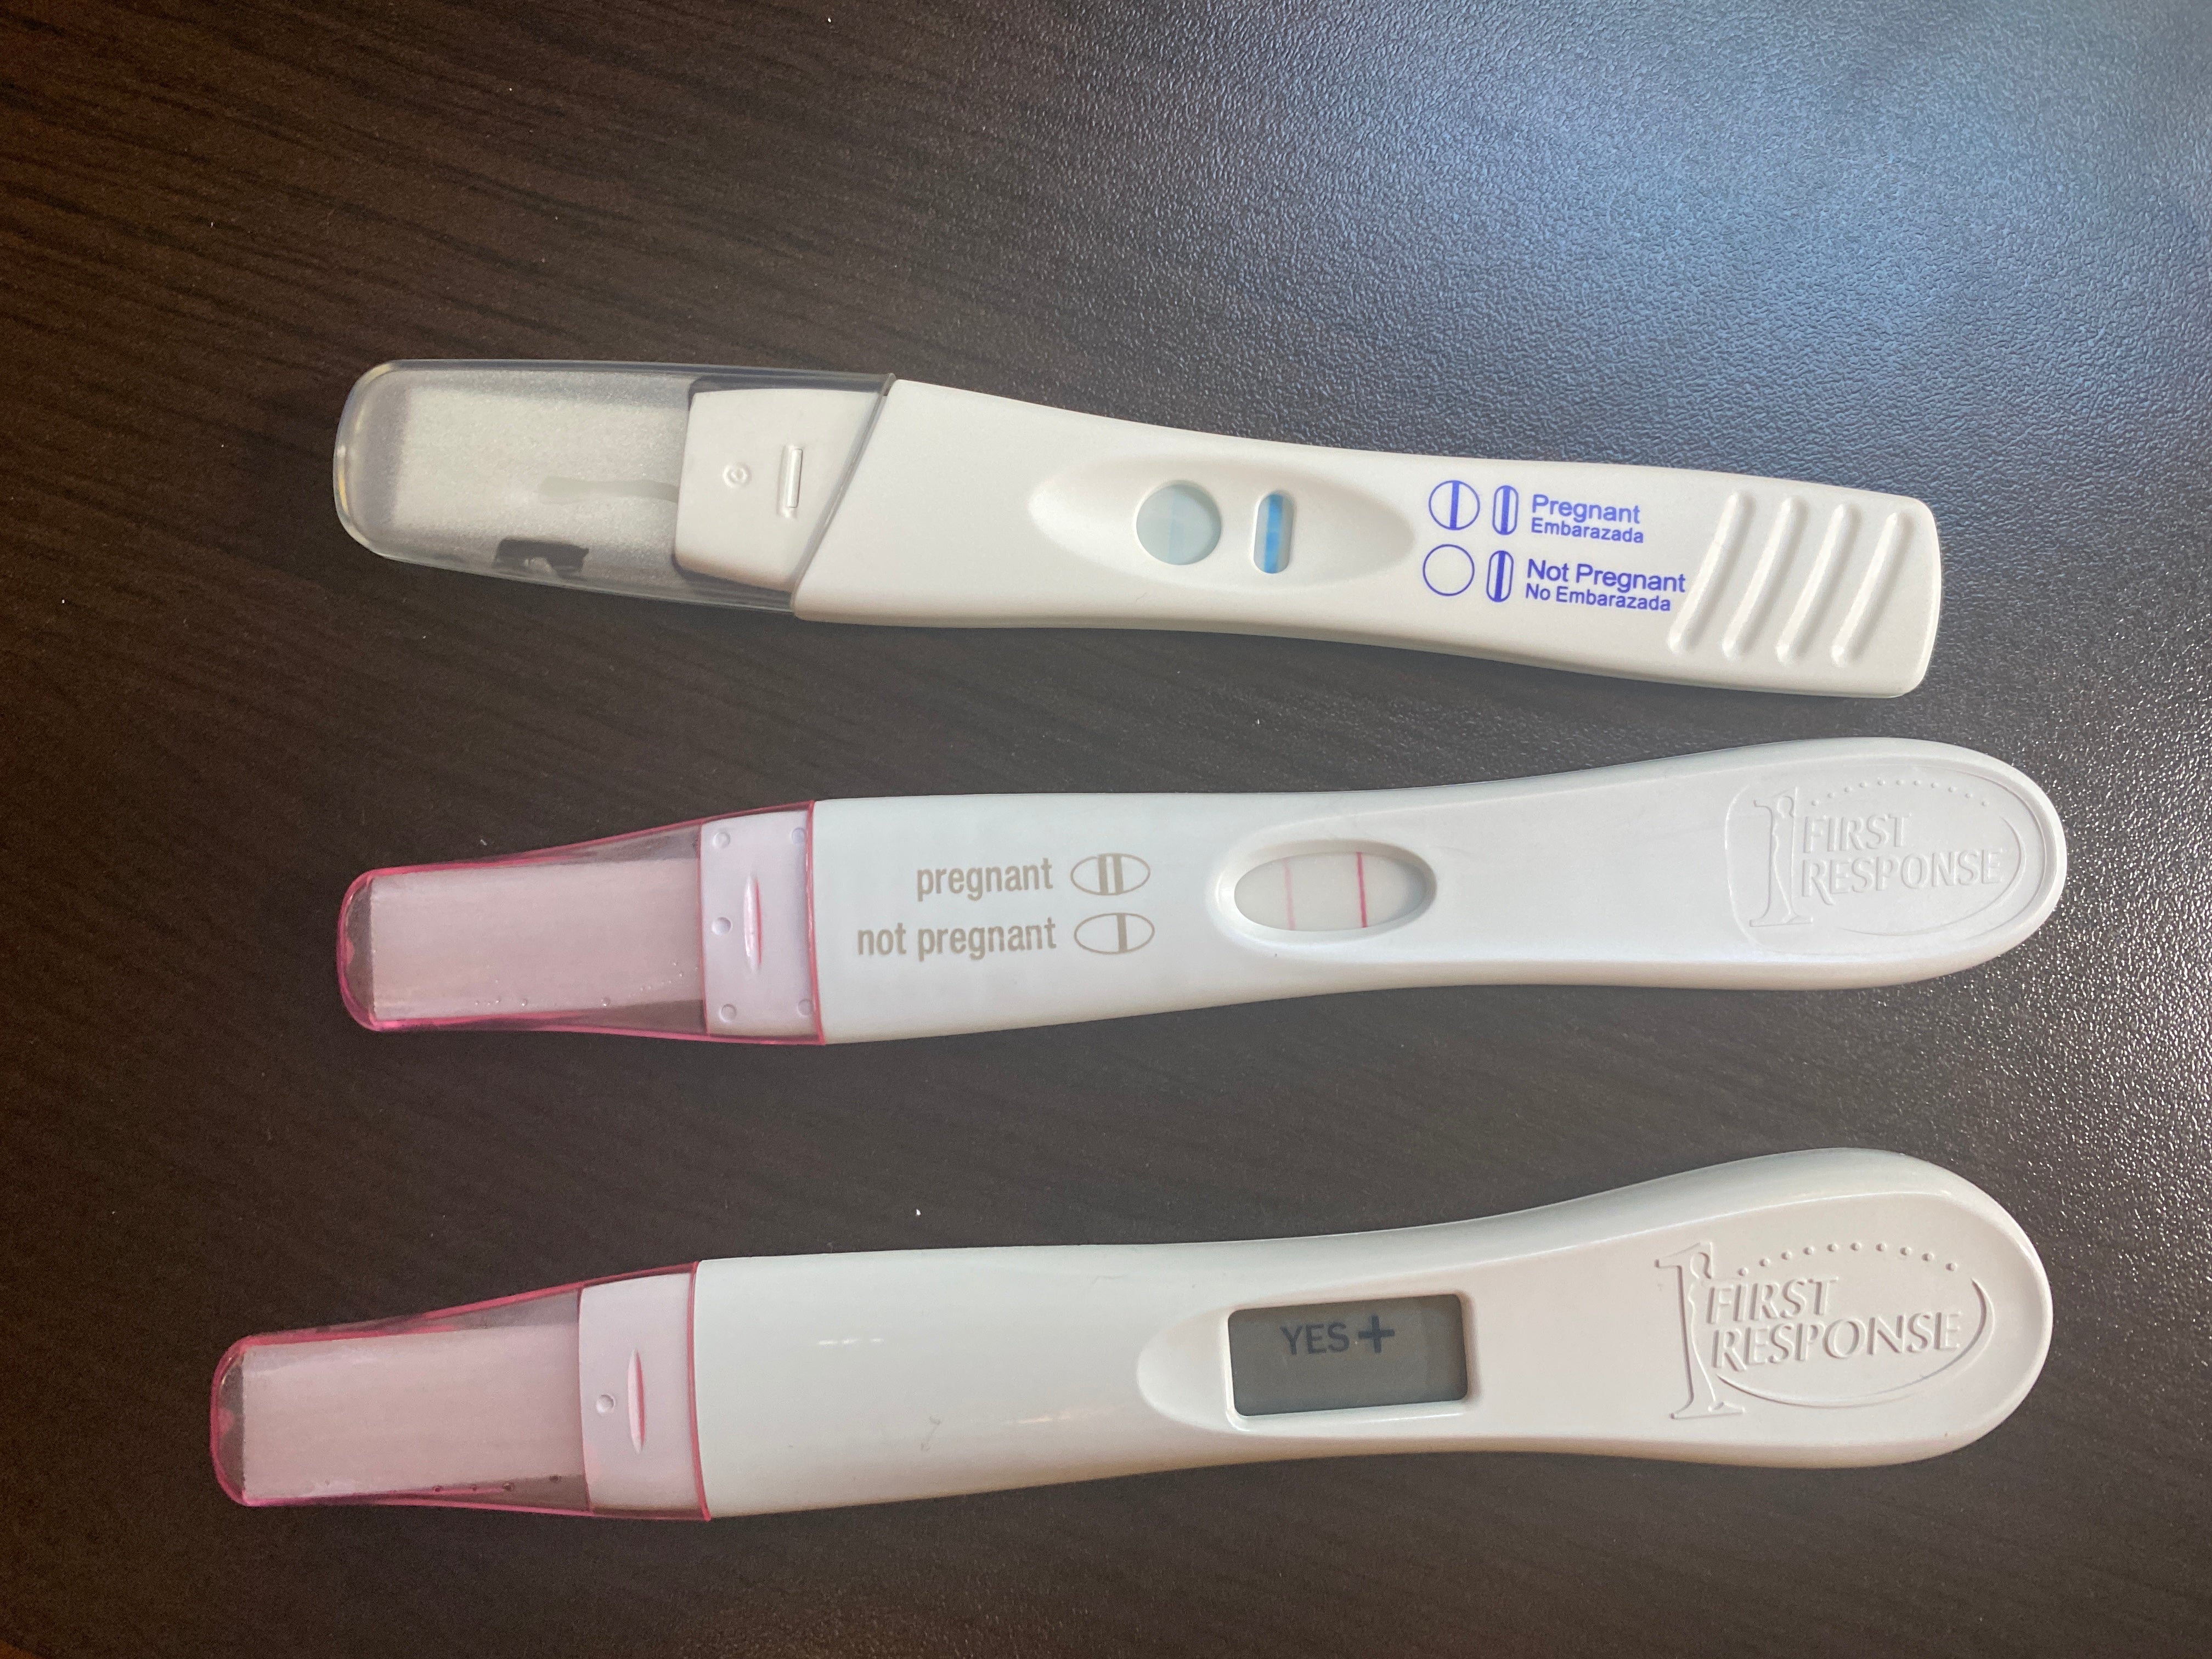 Three positive pregnancy tests from a Mosie family